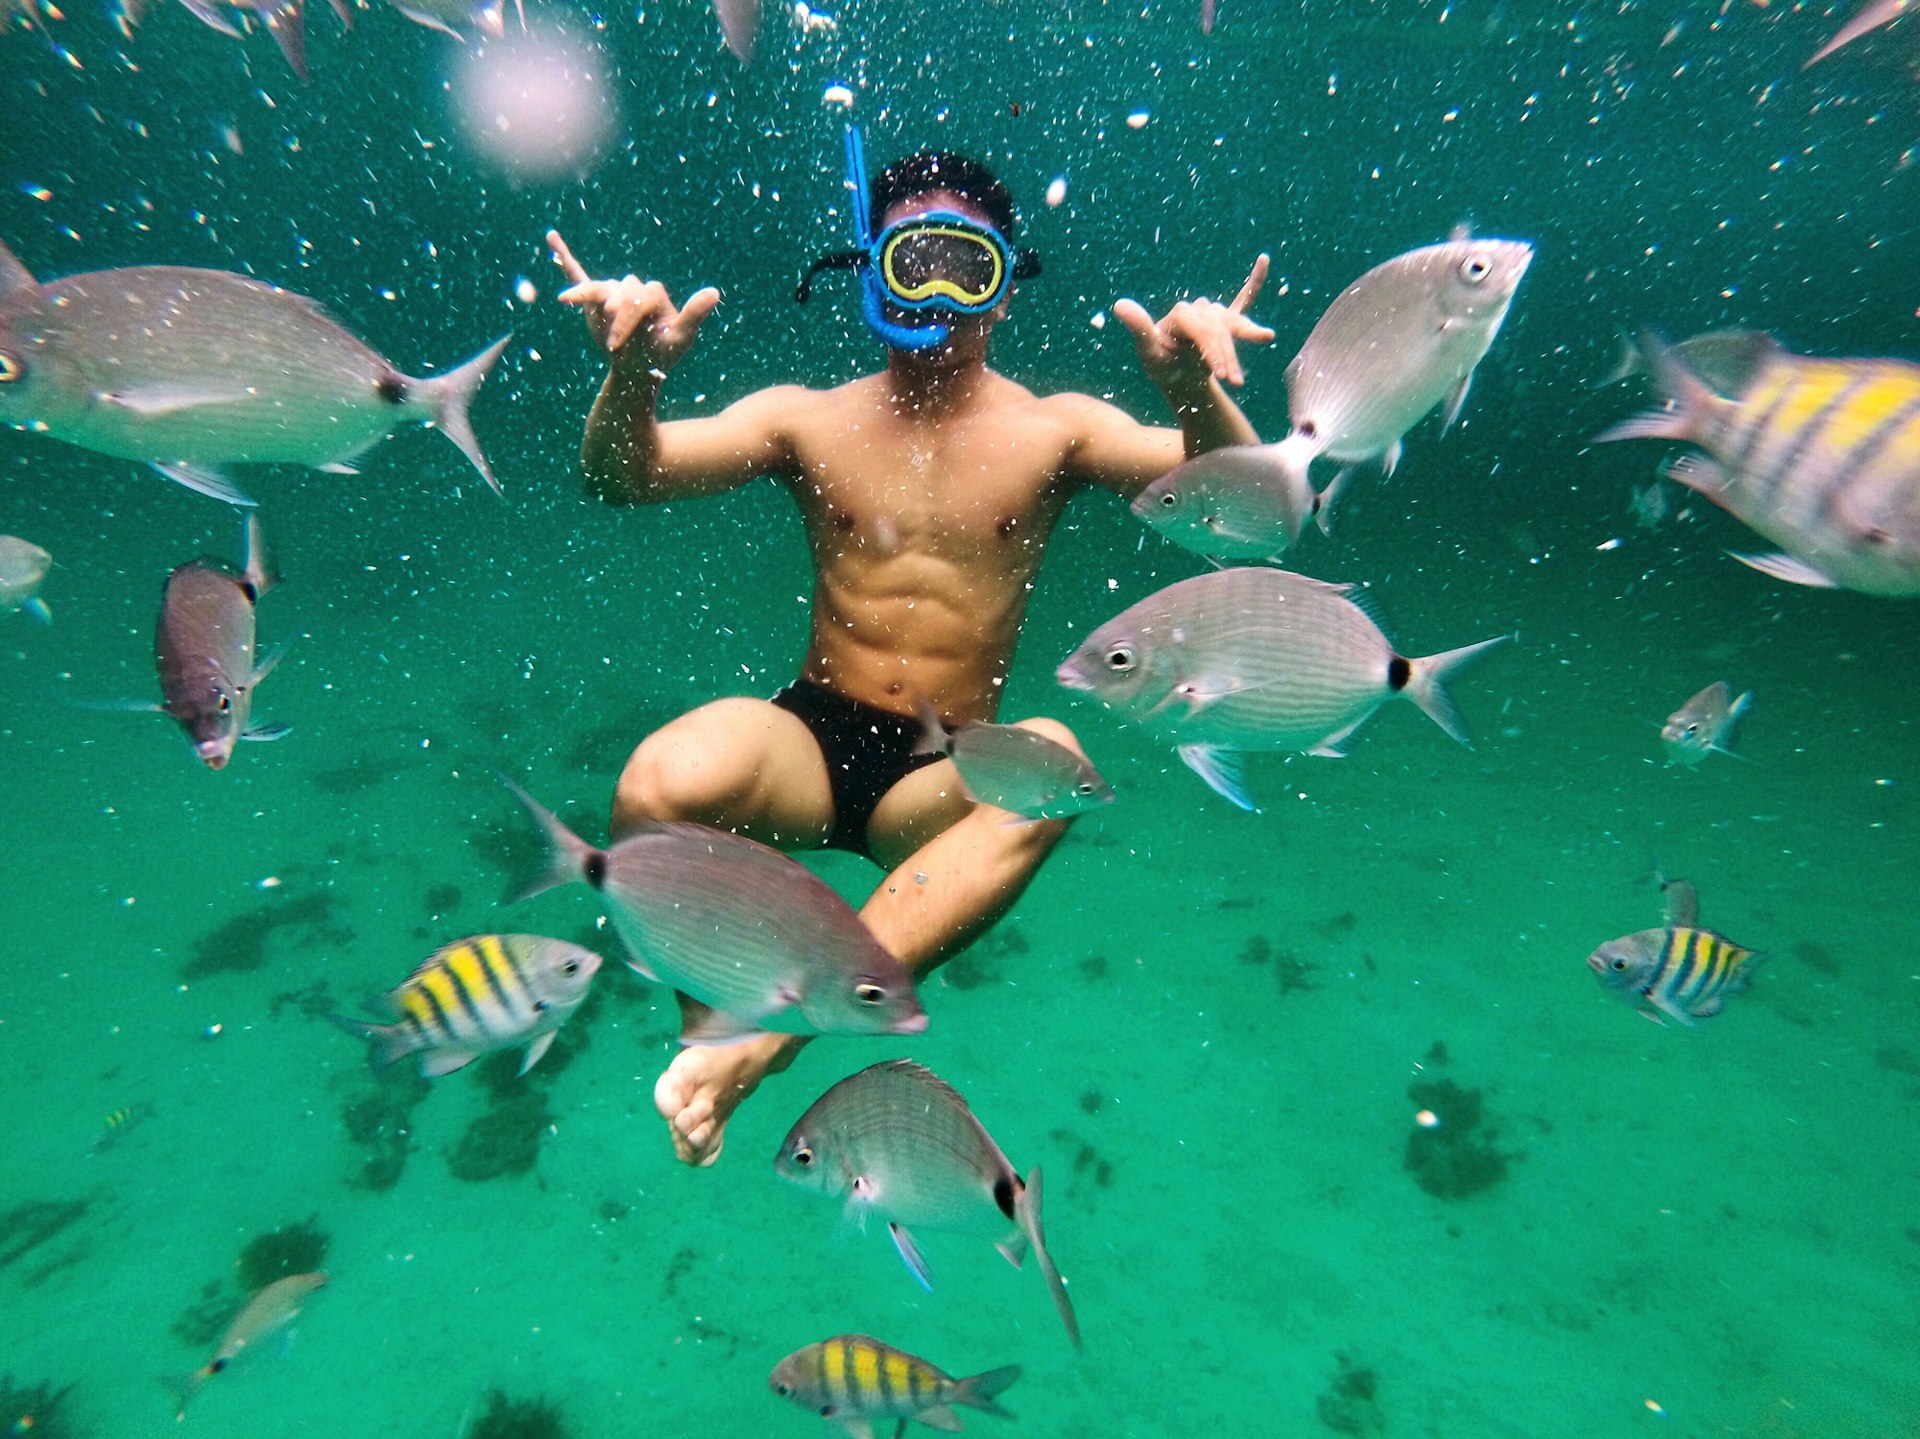 A man snorkelling underwater in Brazil shows his delight amongst a school of small orange fish